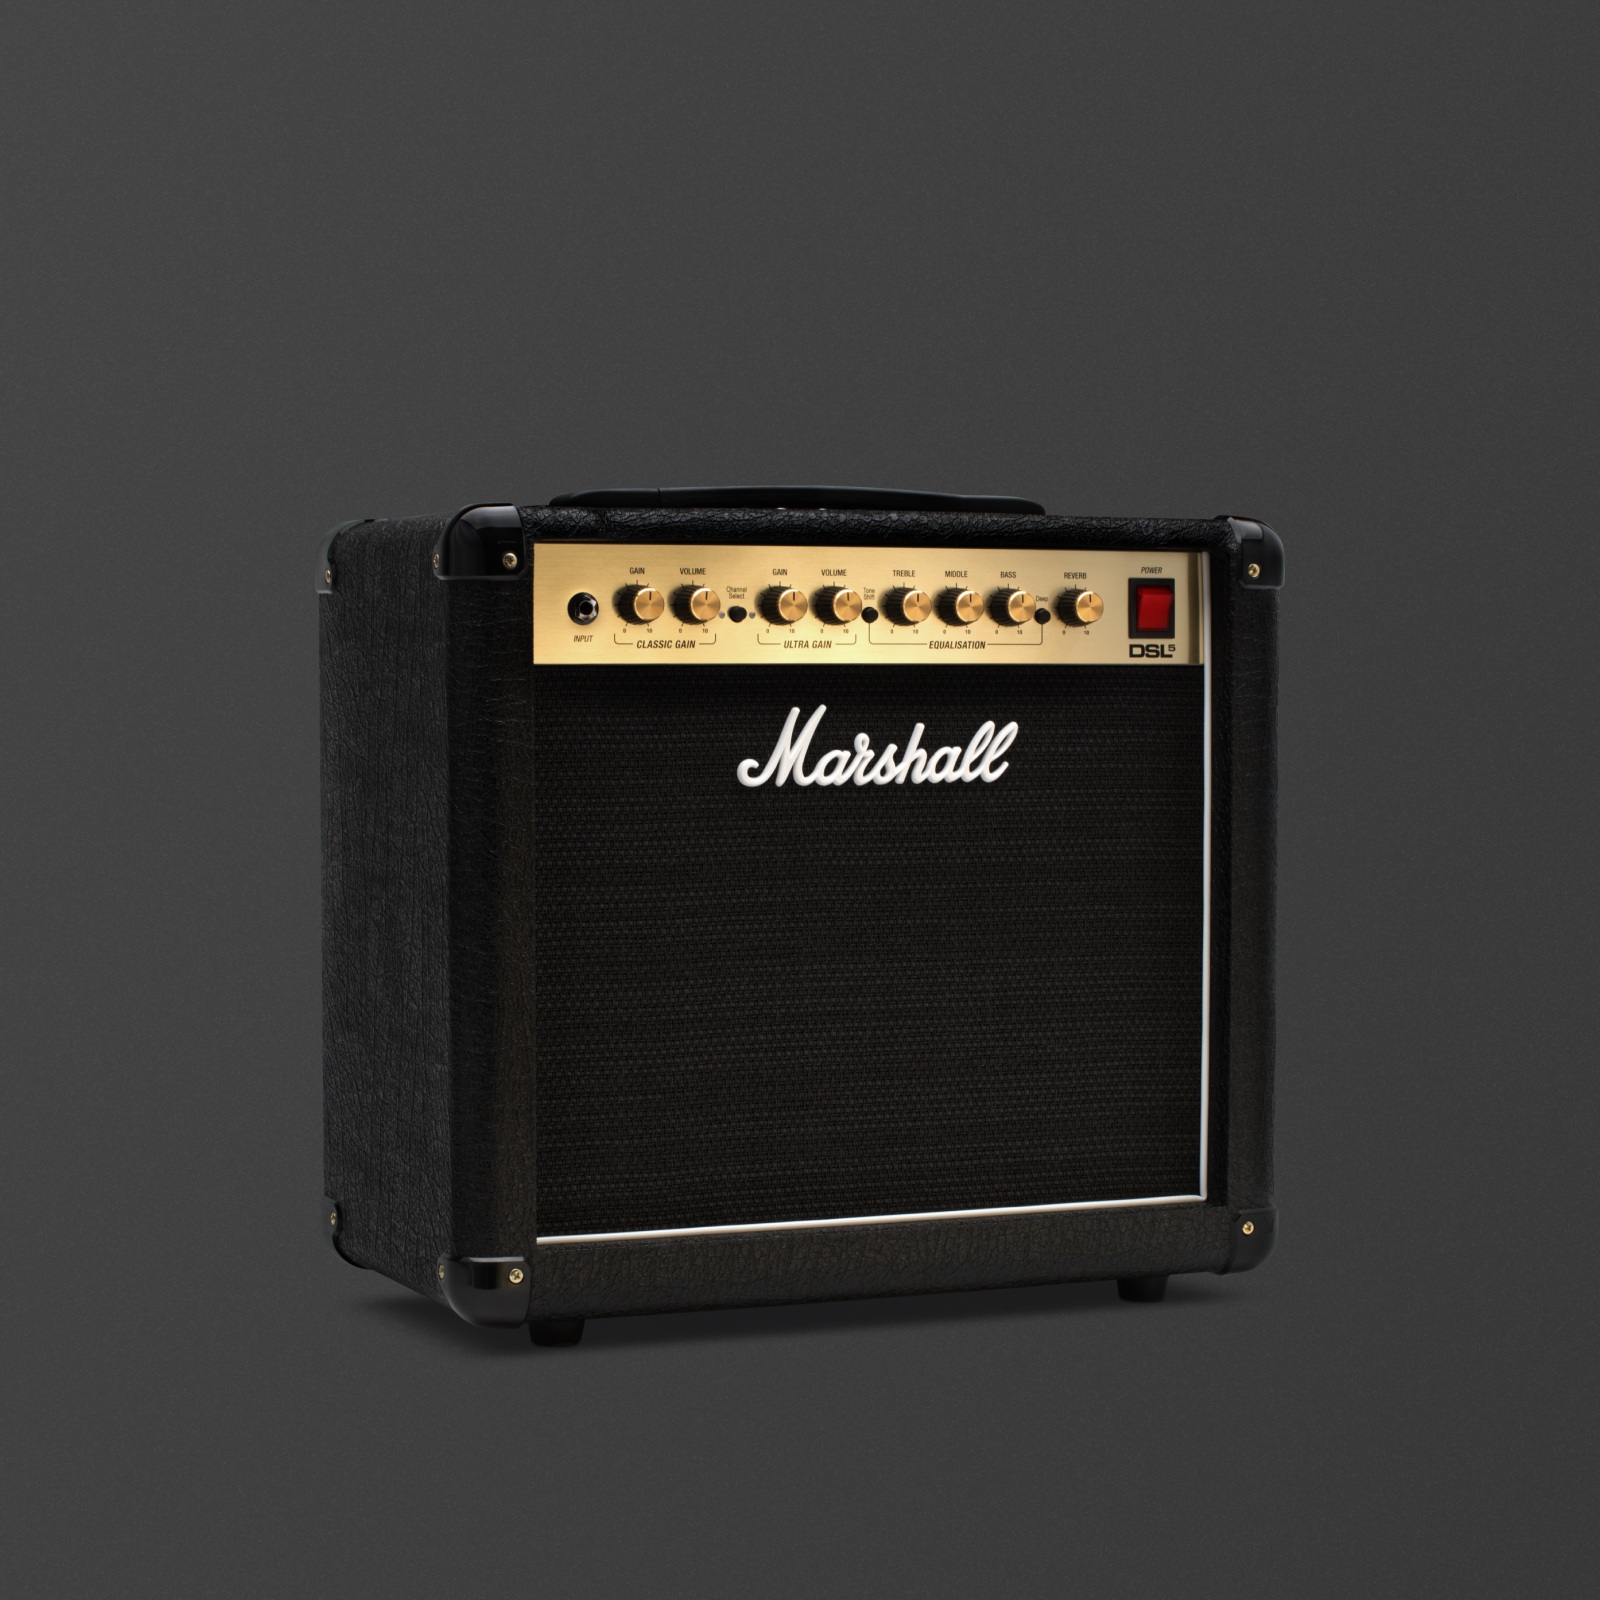 Left side view of the Marshall DSL5 Combo.